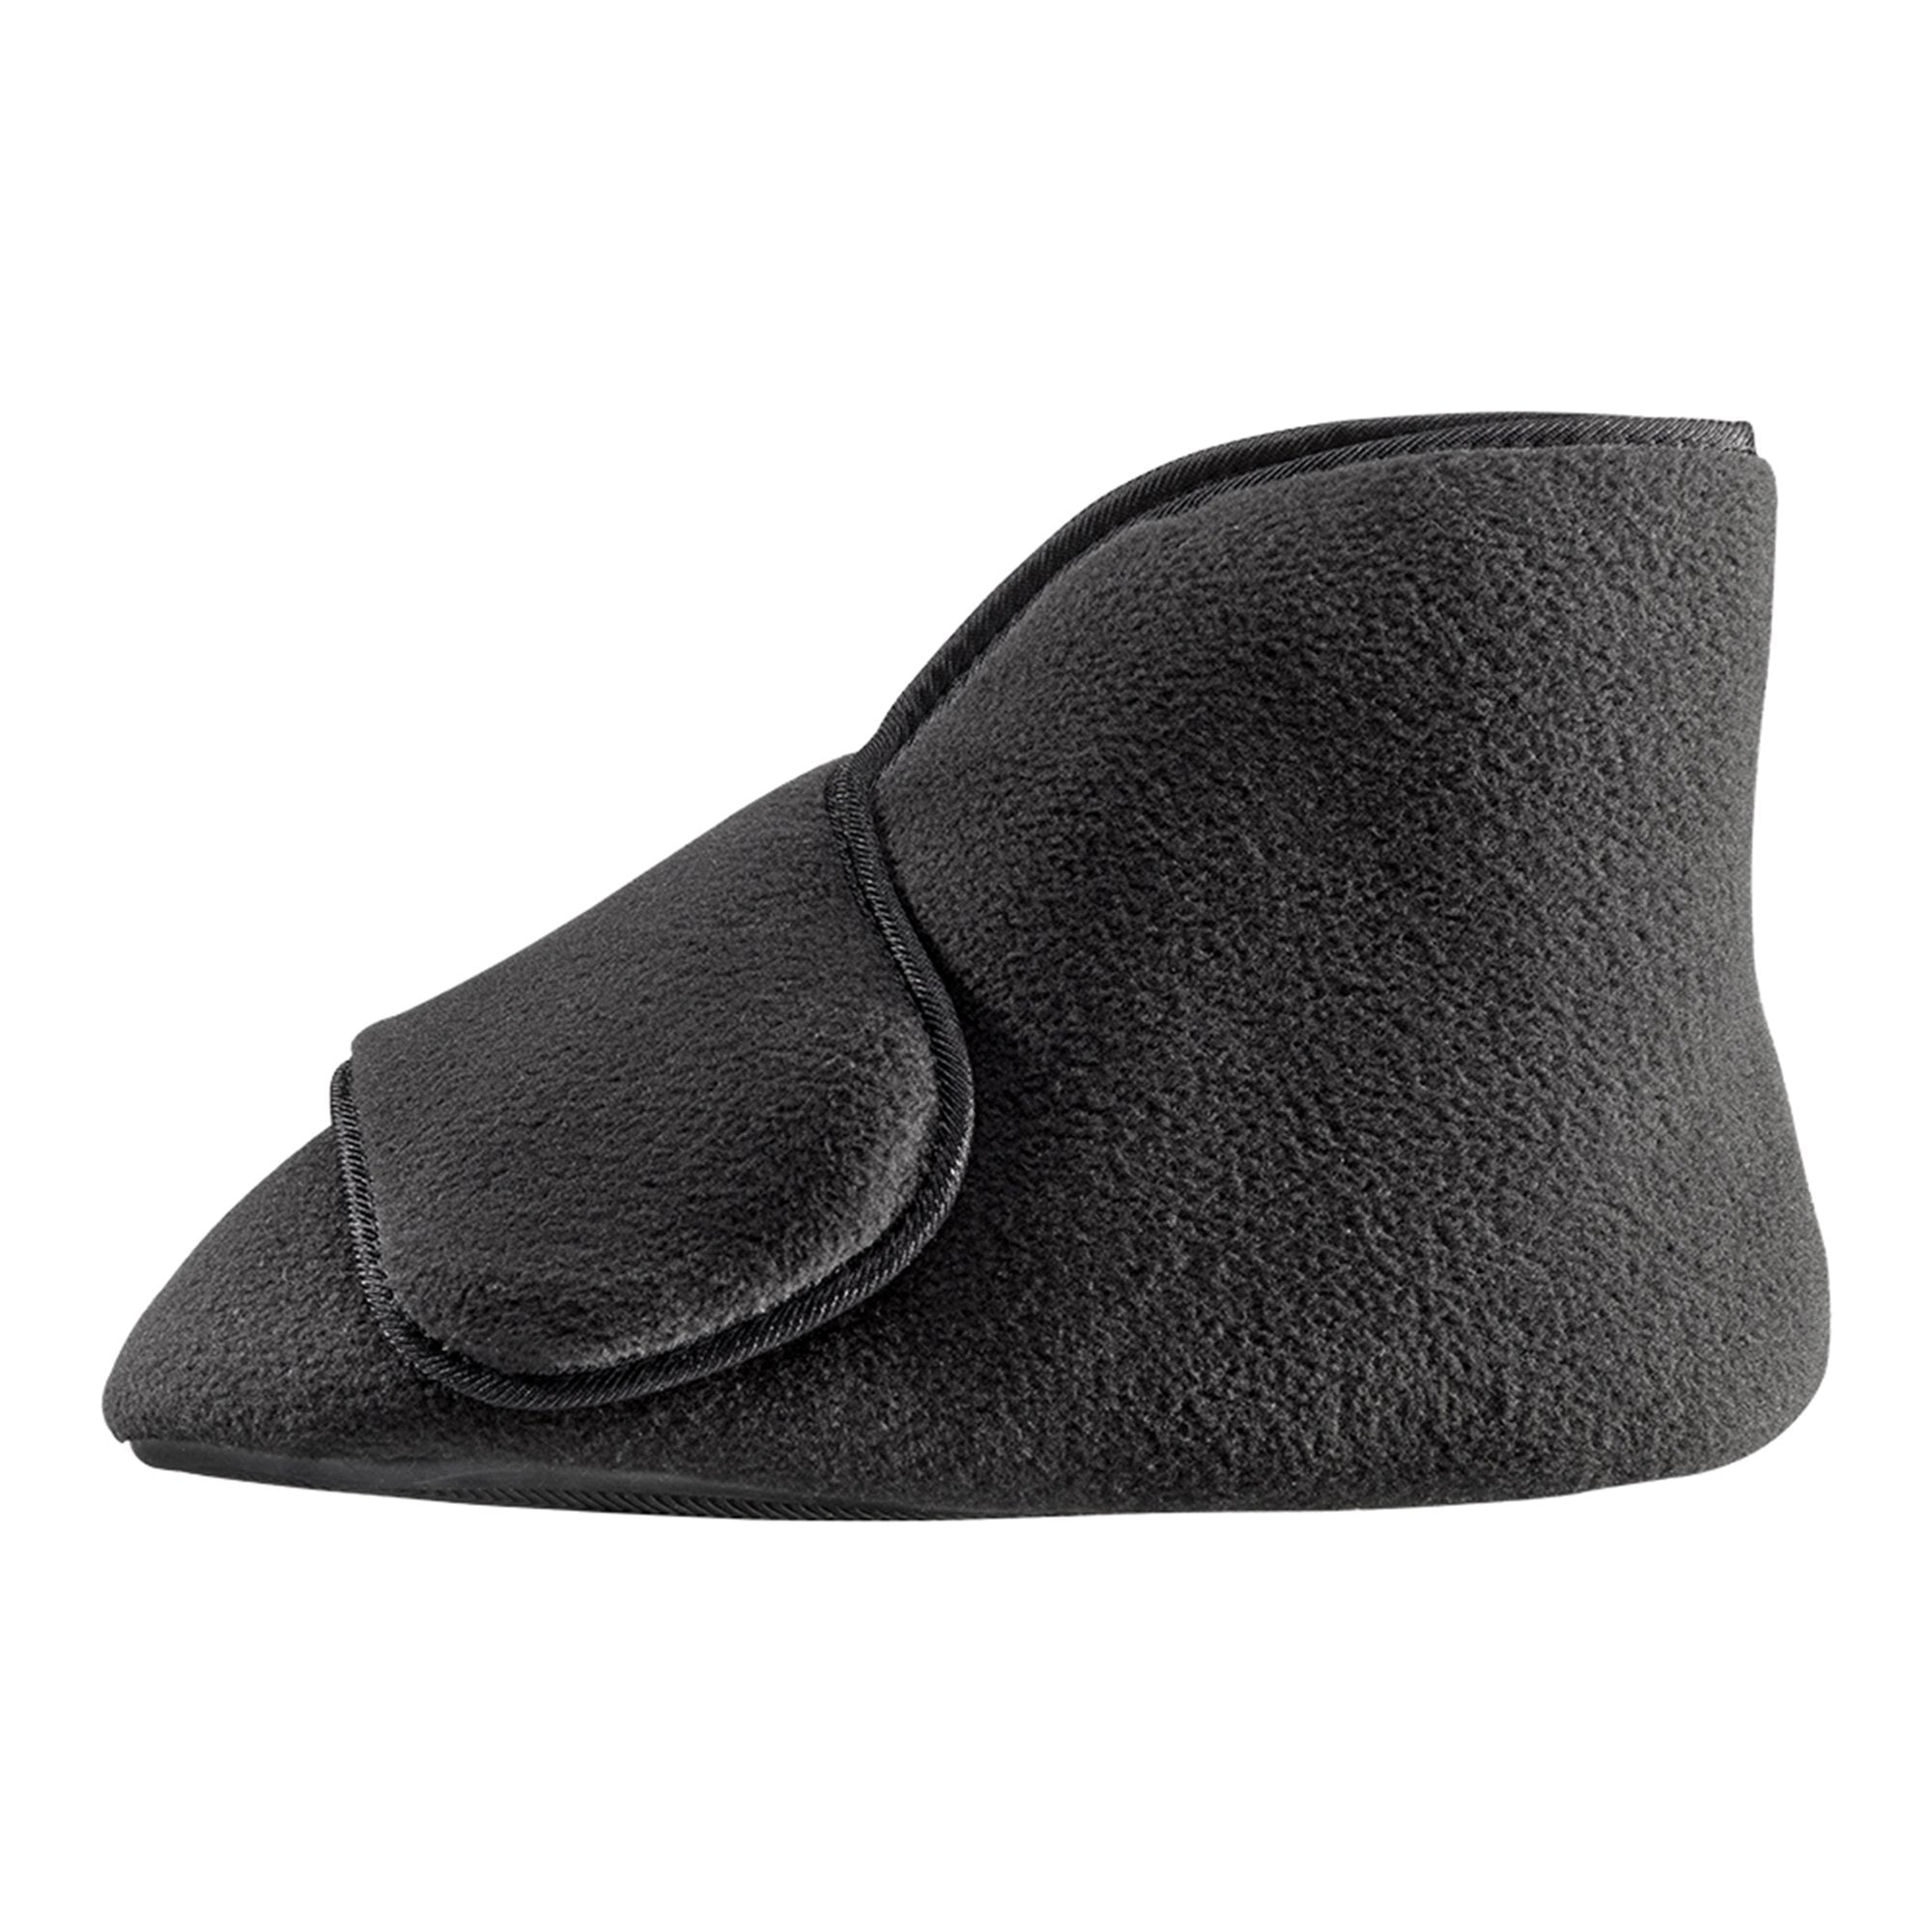 Diabetic Bootie Slippers Silverts 2X-Large / X-Wide Black Ankle High